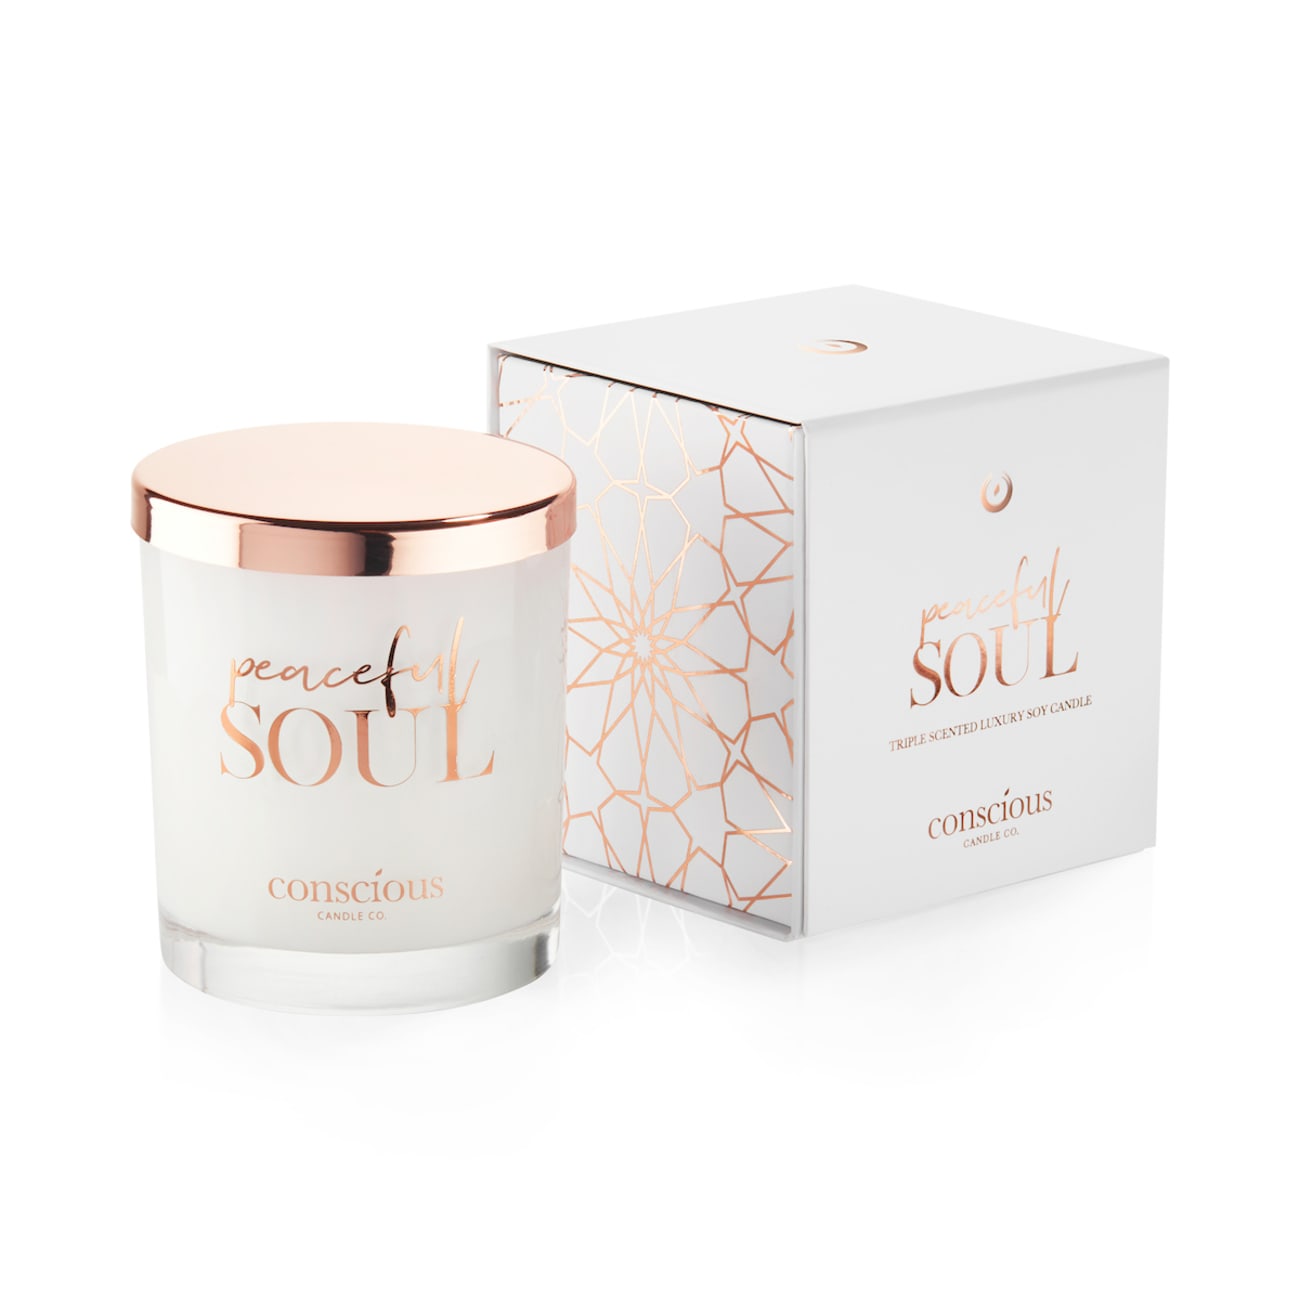 Luxury Soy Candle: Peaceful Soul Moroccan Cedar and Sage, 55+ Hours Burn Time (John 14:27) Homeware